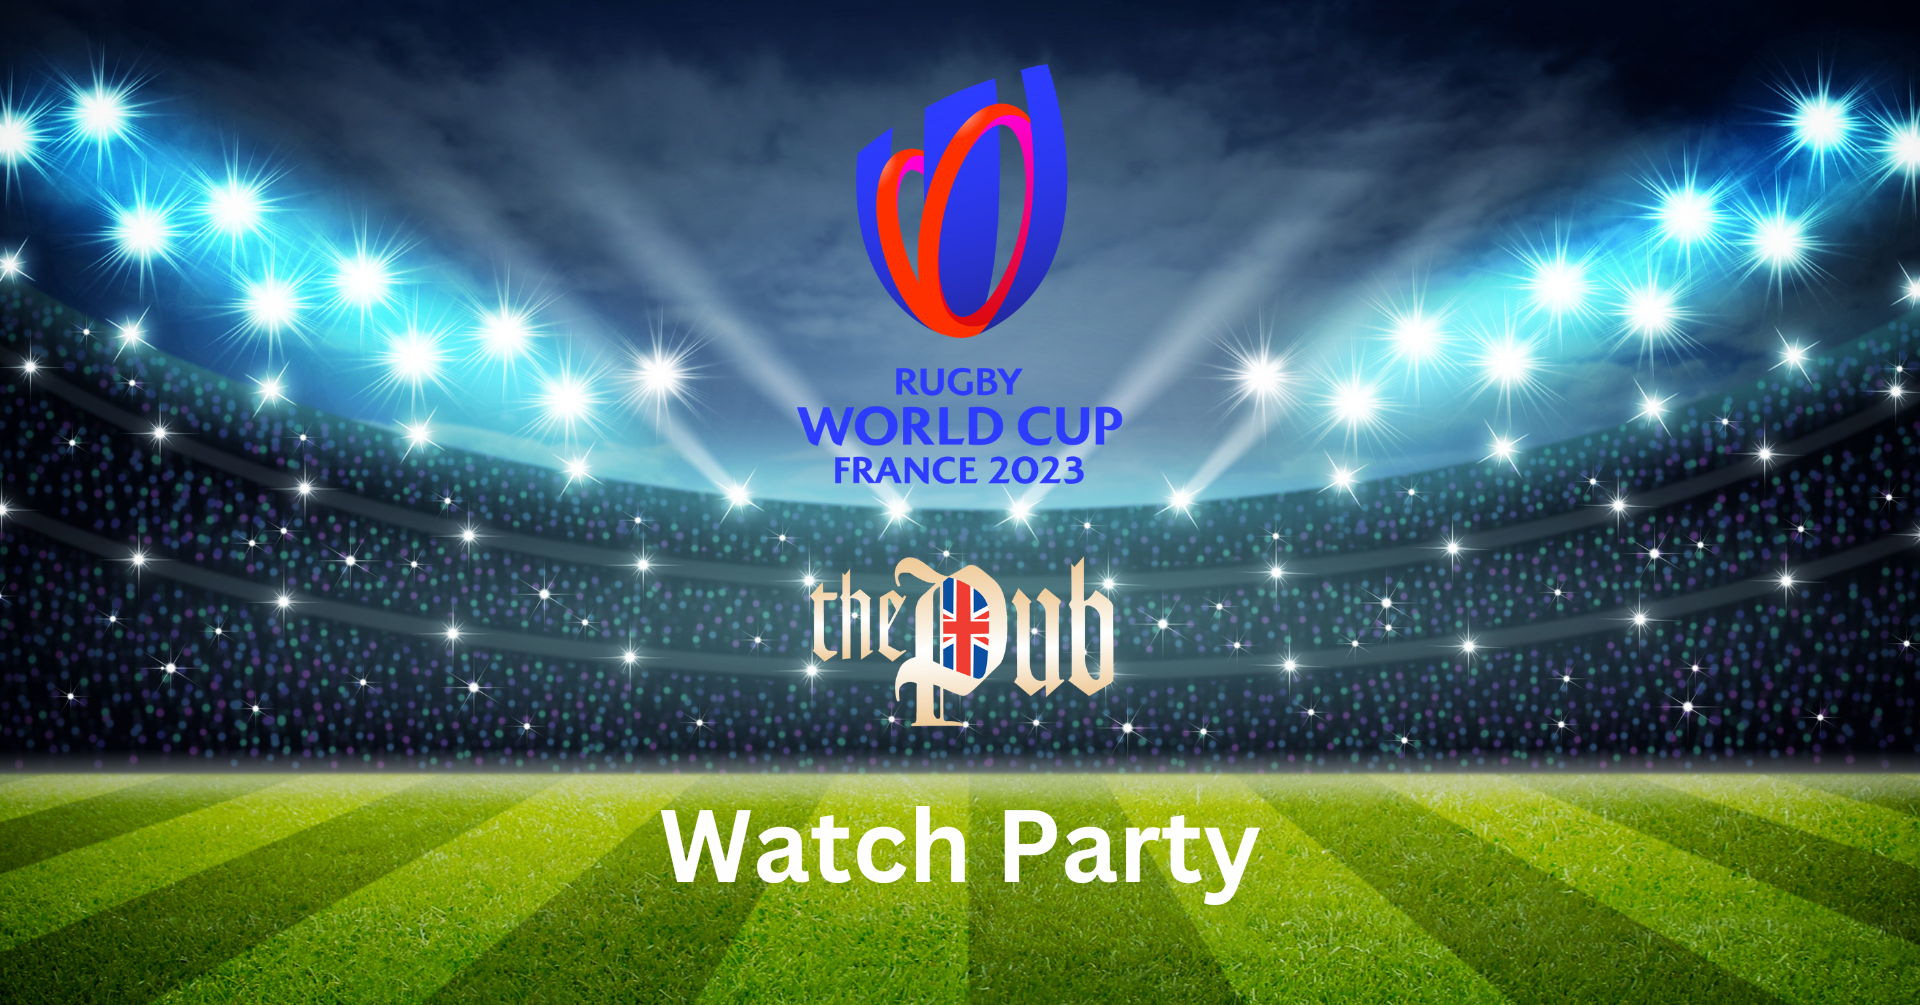 Rugby World Cup Watch Party England v